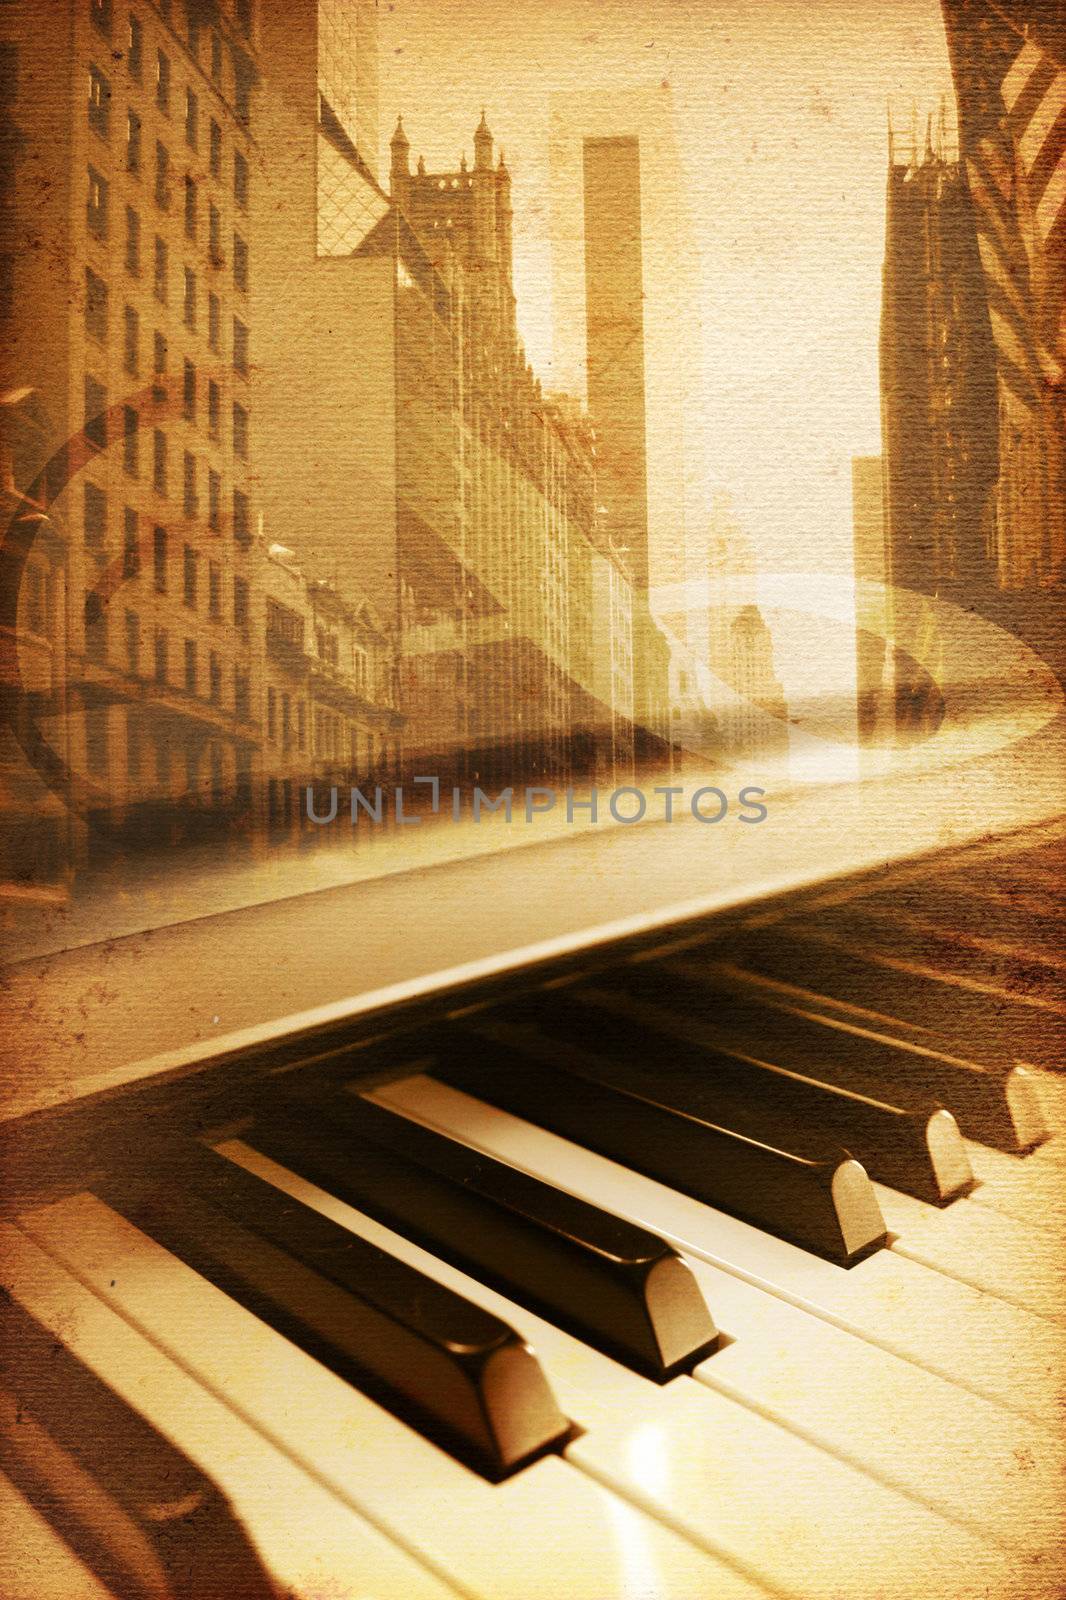 old historical new york background with broadway